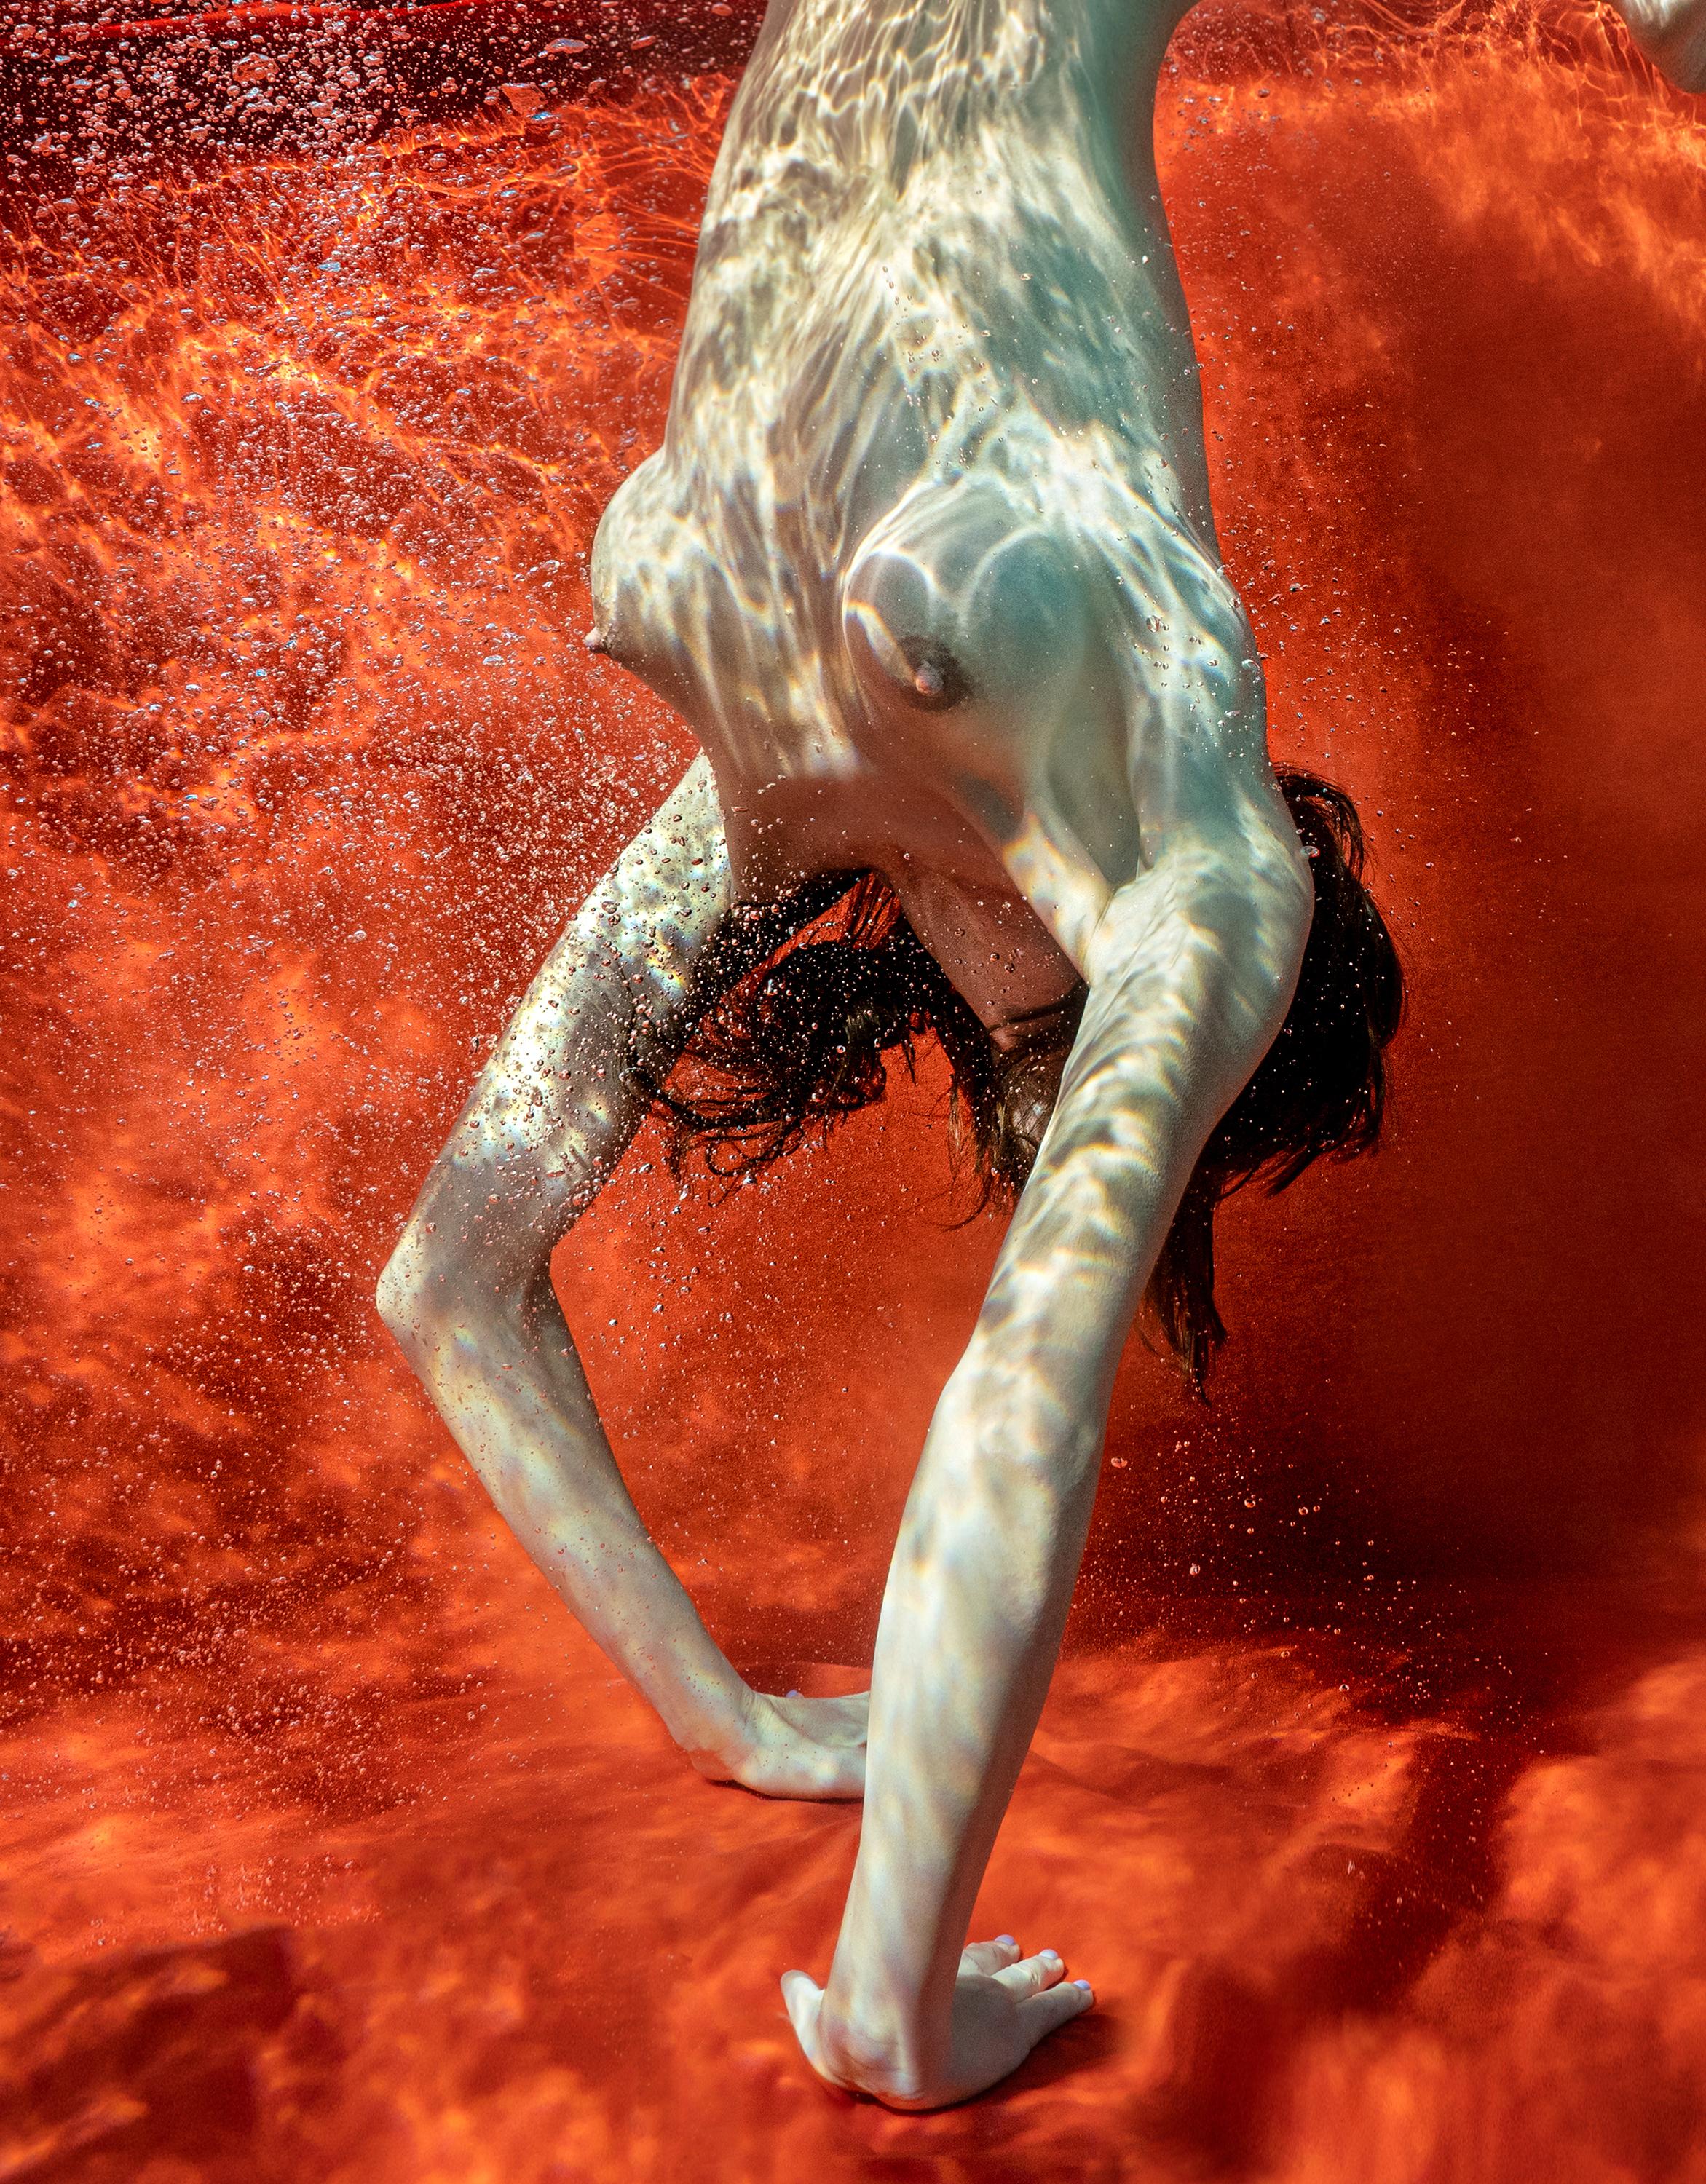 Blood and Milk VIII - underwater nude photograph - archival pigment print 35x26